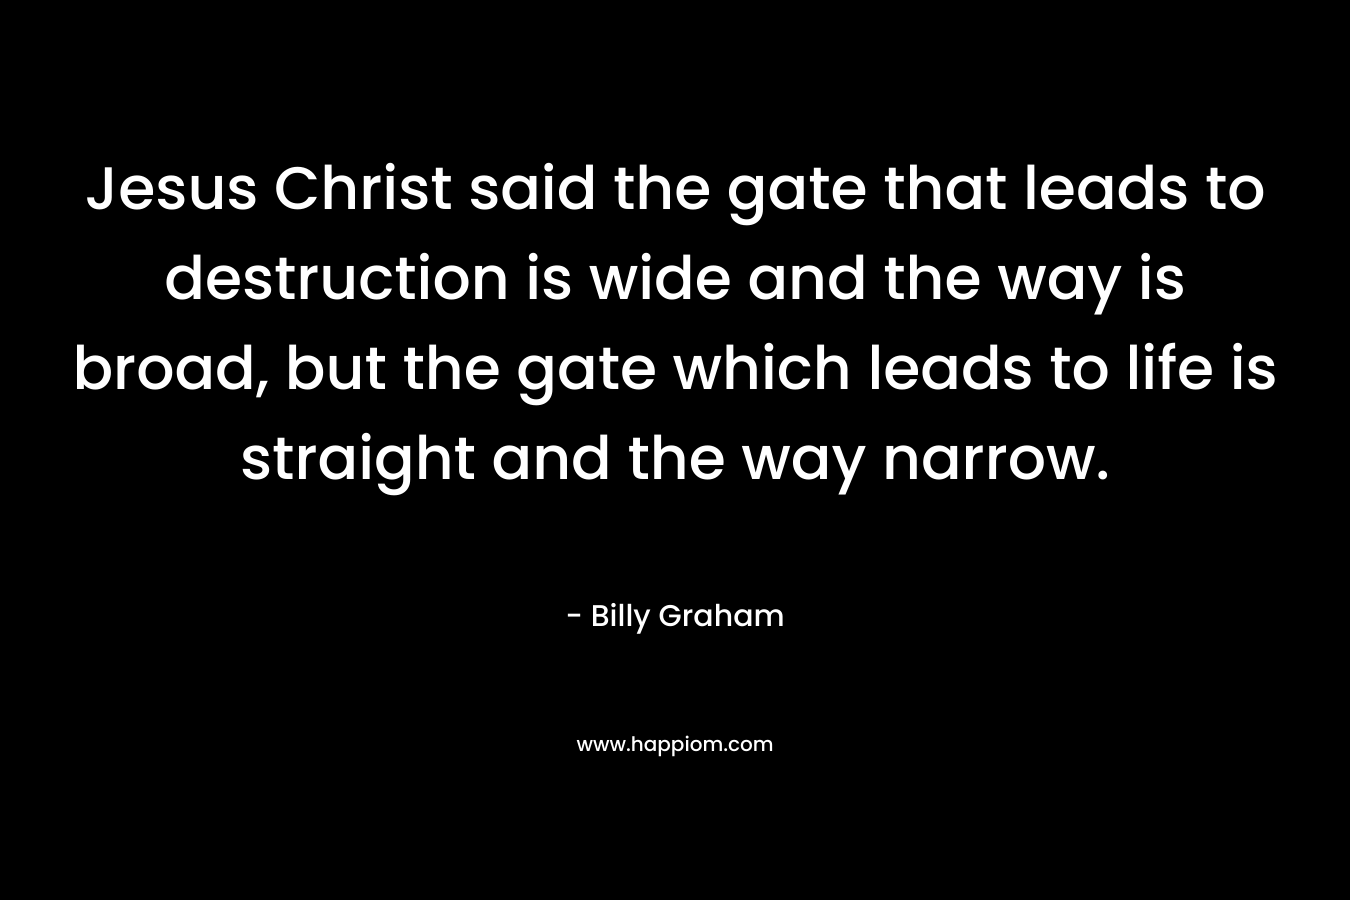 Jesus Christ said the gate that leads to destruction is wide and the way is broad, but the gate which leads to life is straight and the way narrow.